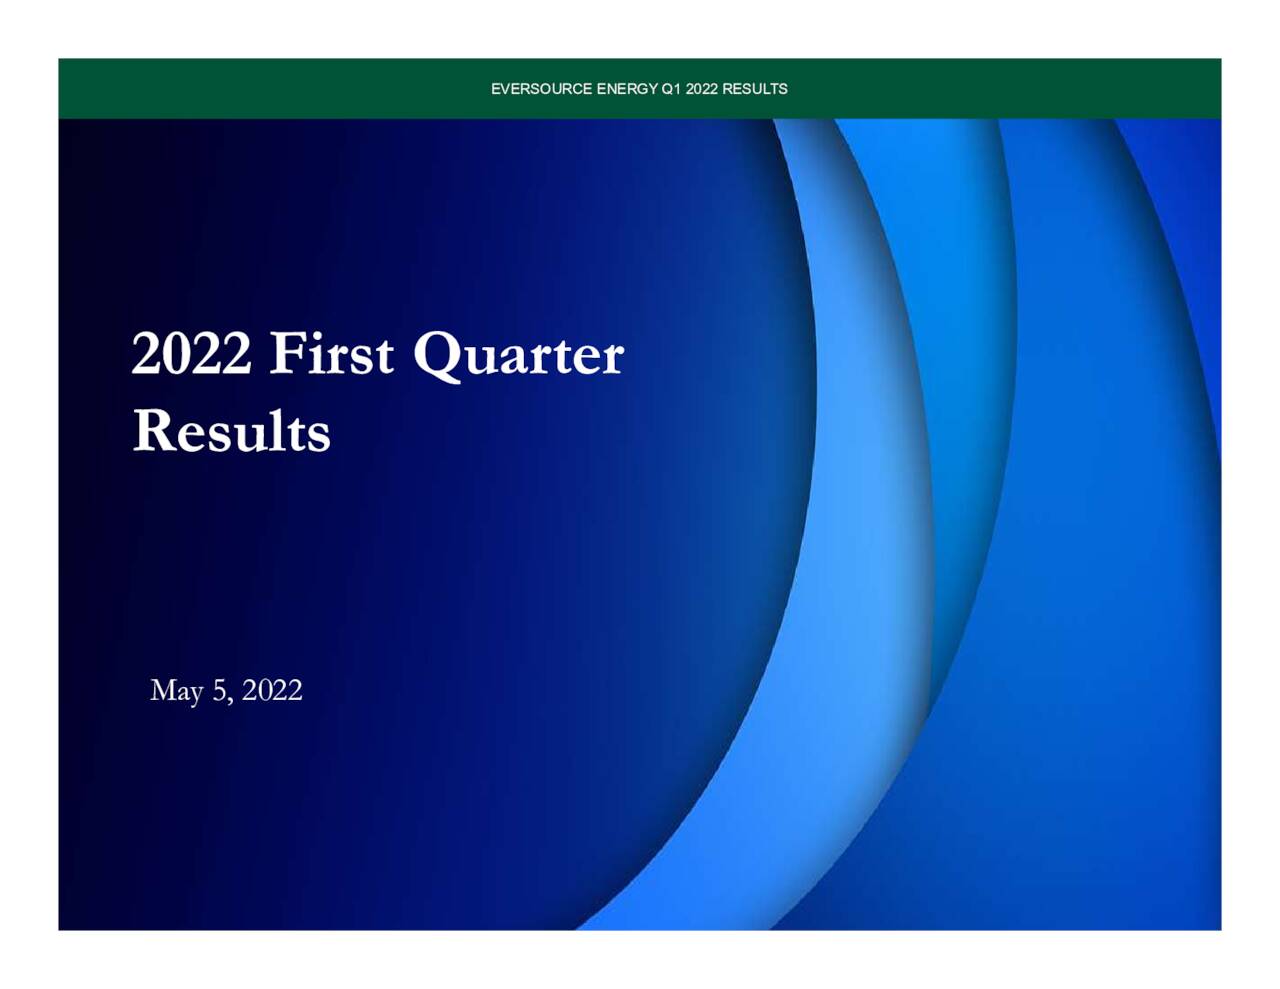 eversource-energy-2022-q1-results-earnings-call-presentation-nyse